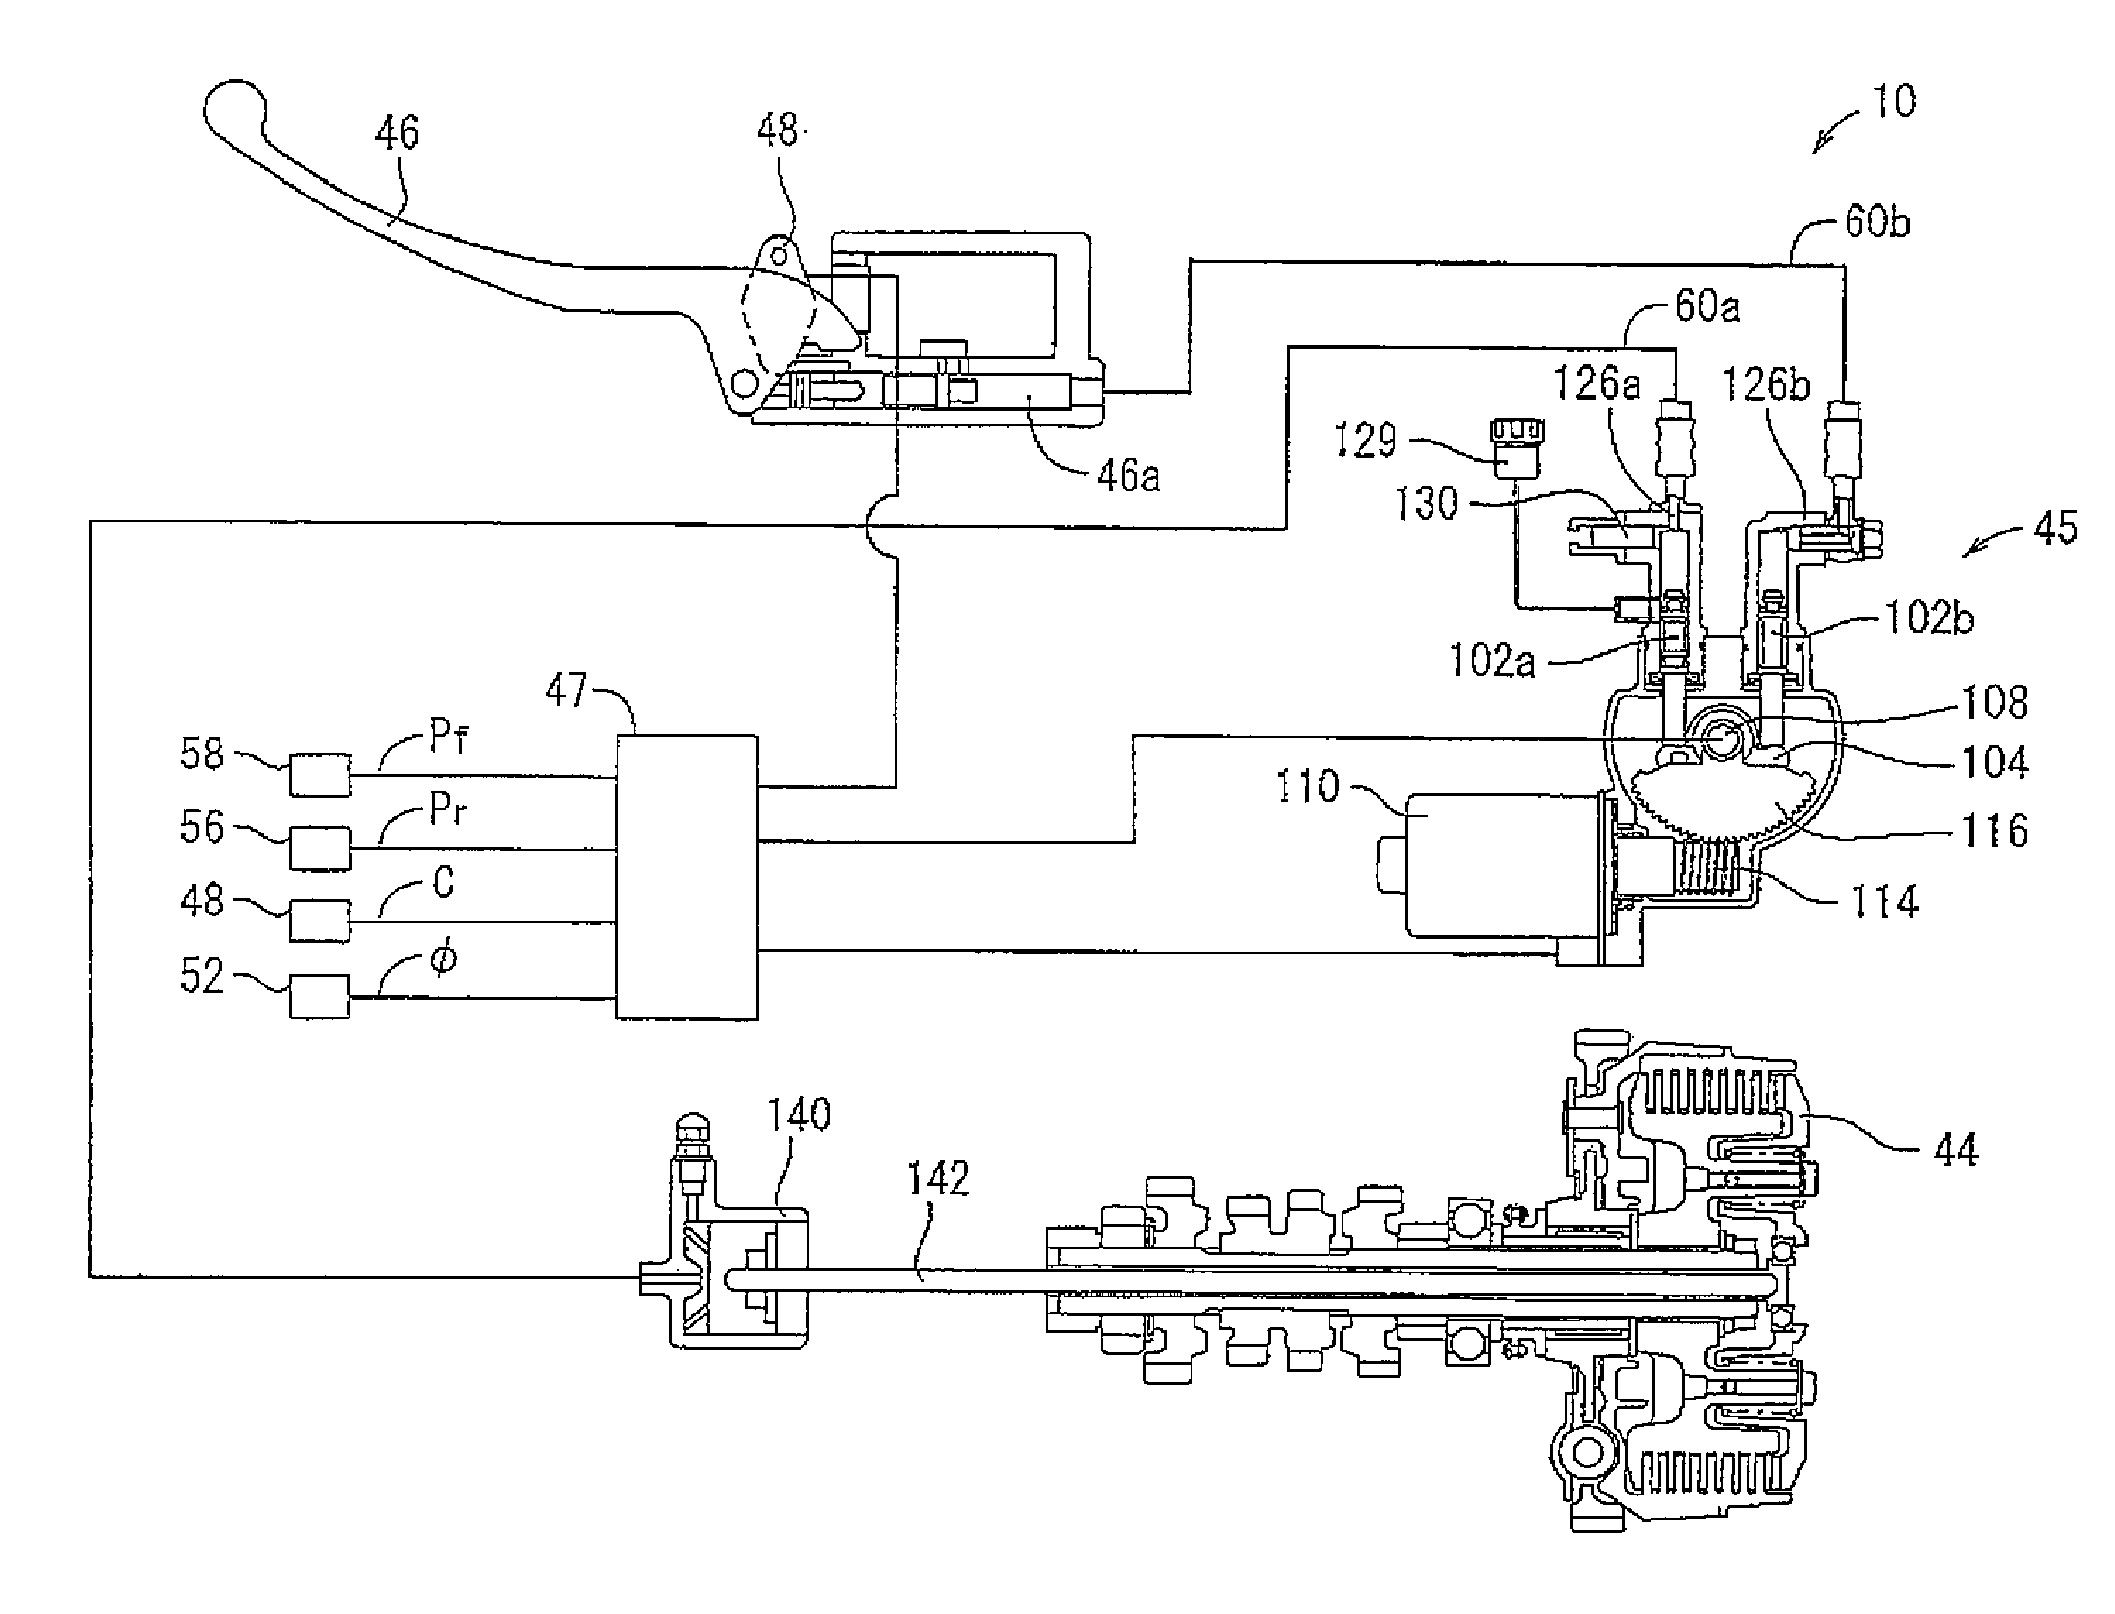 Clutch control system for saddle riding type vehicle